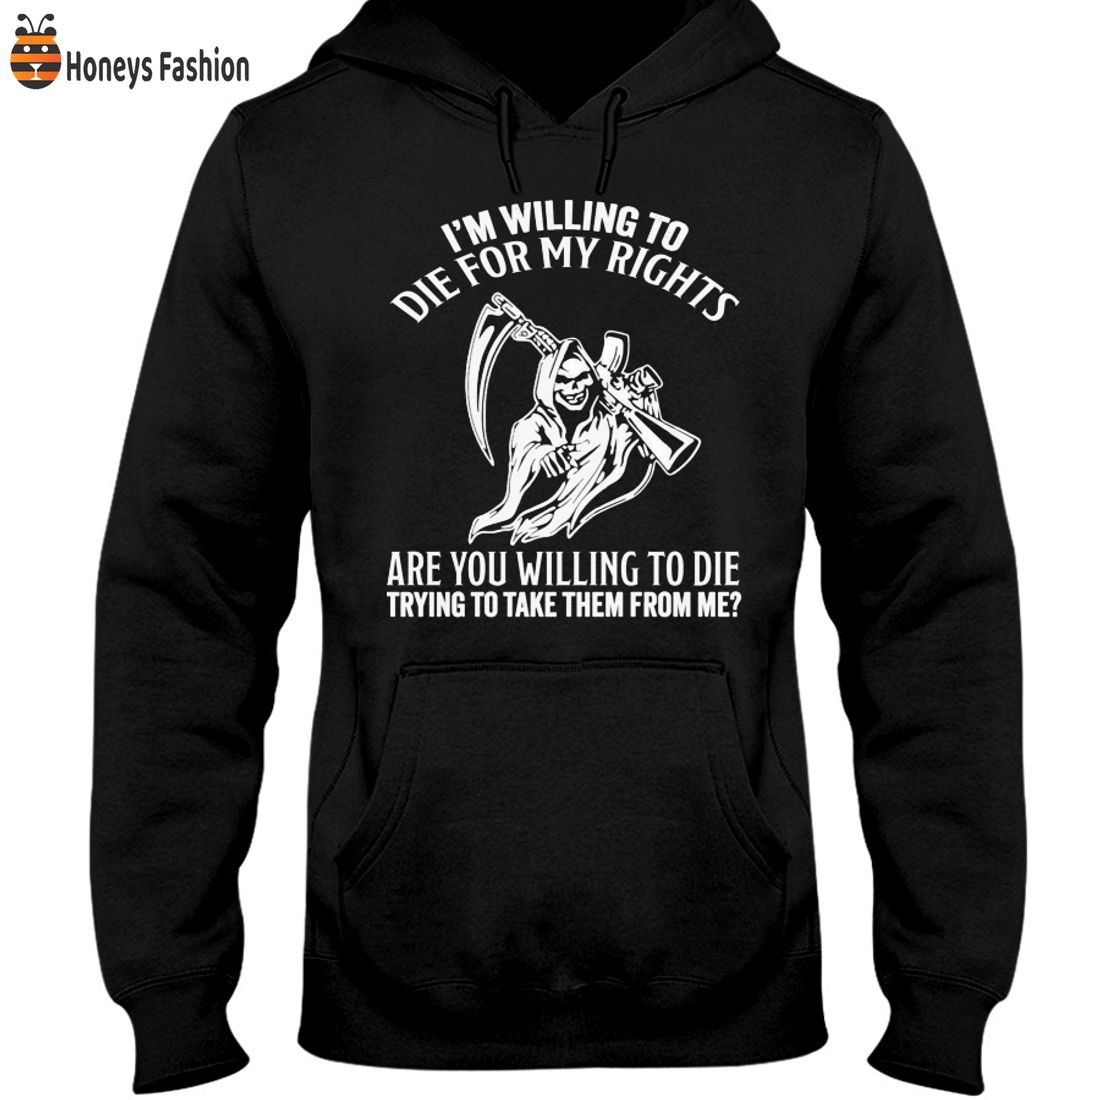 TOP SELLER I’m Willing To Die For My Rights Are You Willing To Die Trying To Take Them From Me Shirt